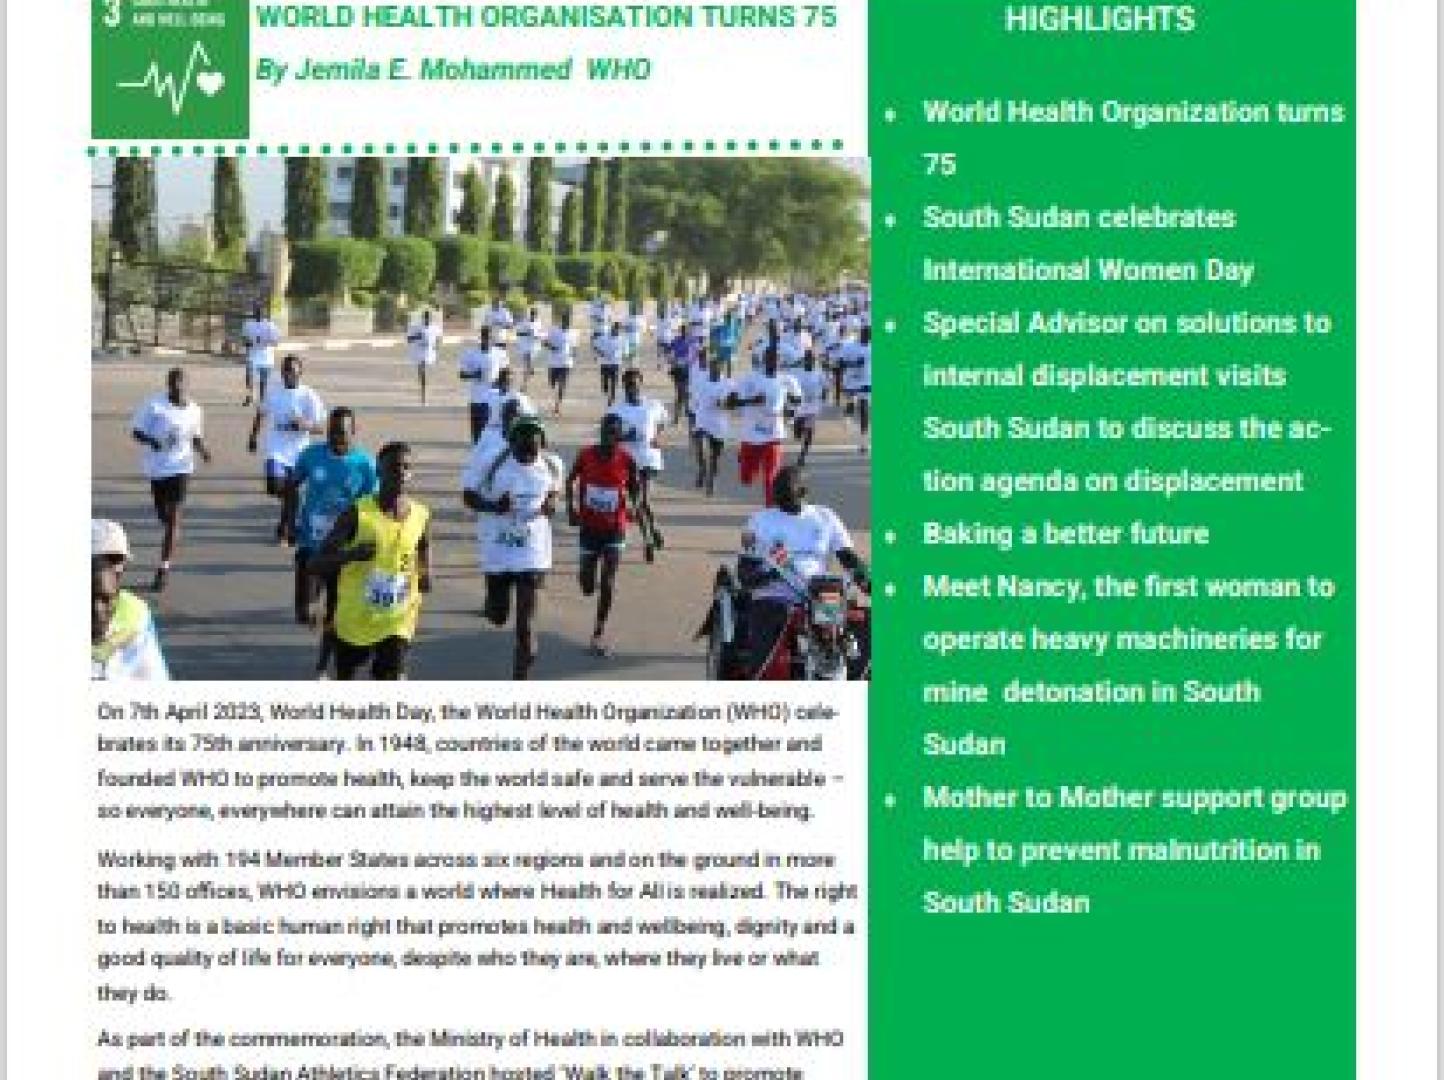 UNCT Newsletter, March-April